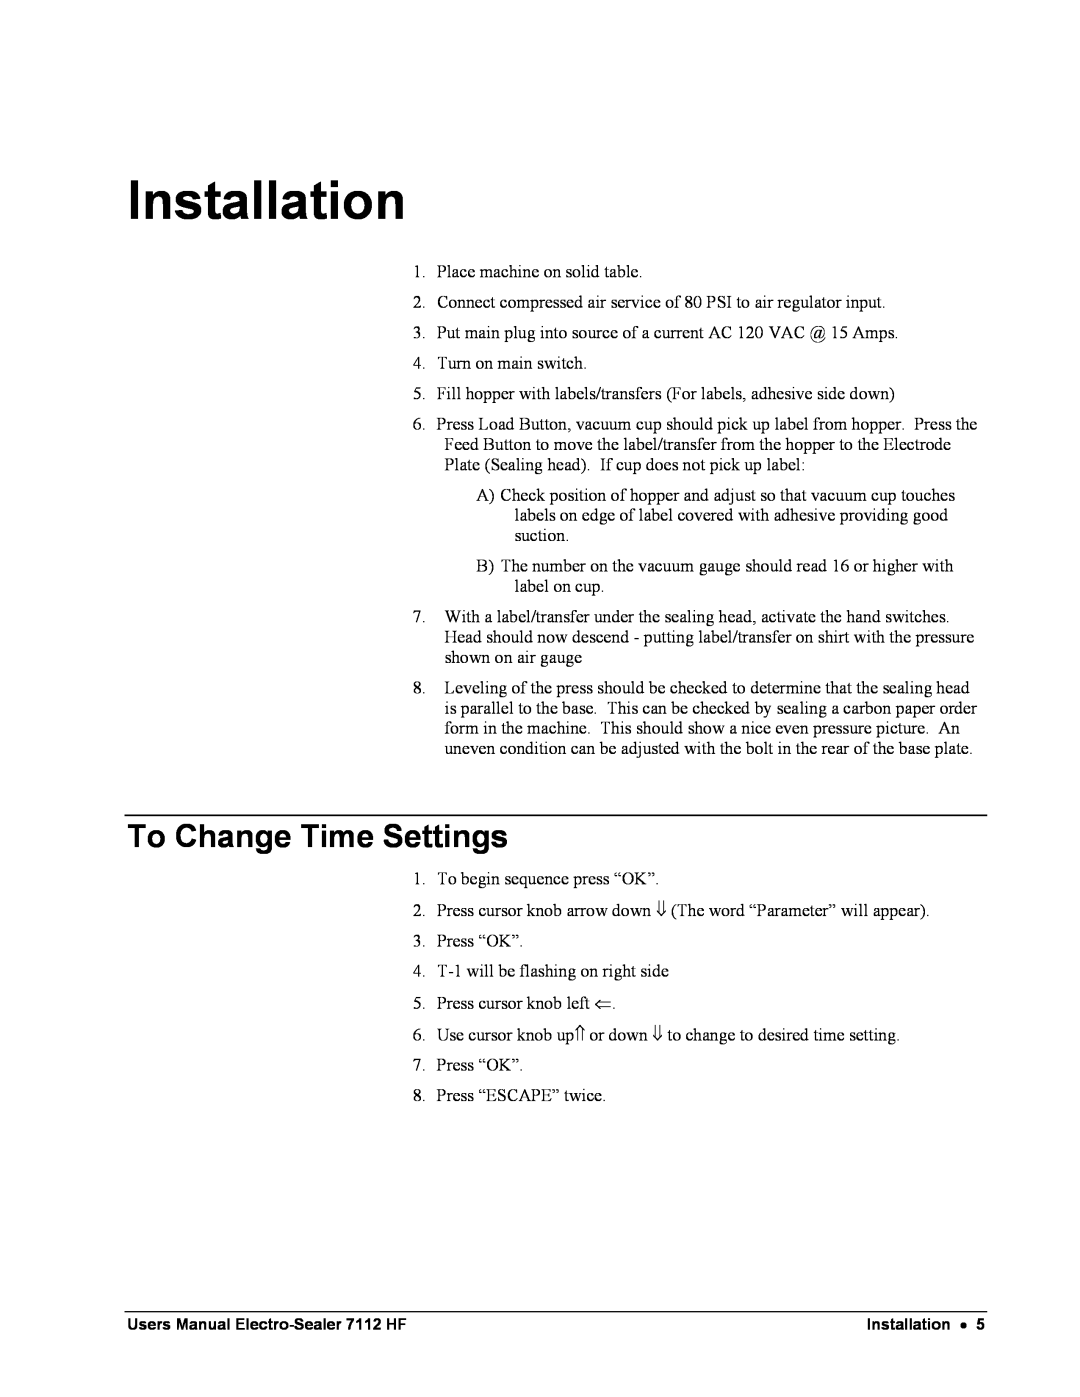 Avery 7112 HF user manual Installation, To Change Time Settings 